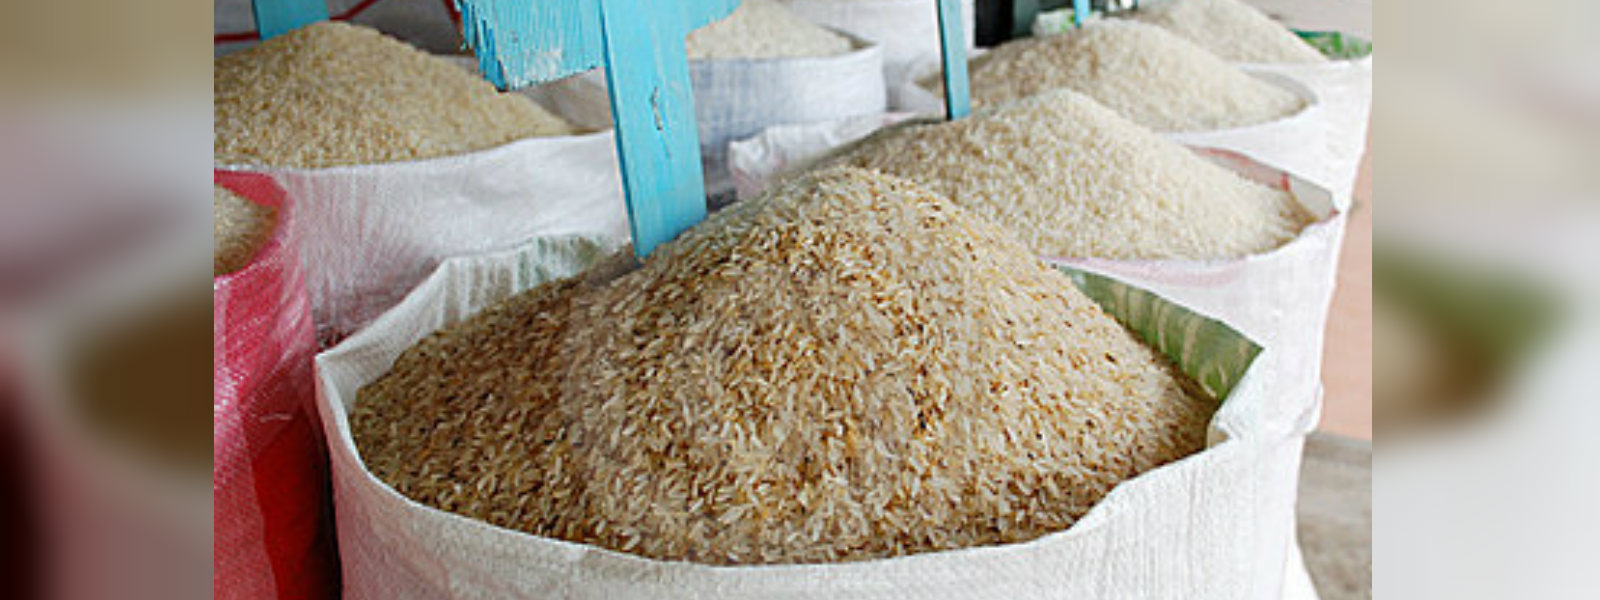 Maximum retail price for rice from 01st April 